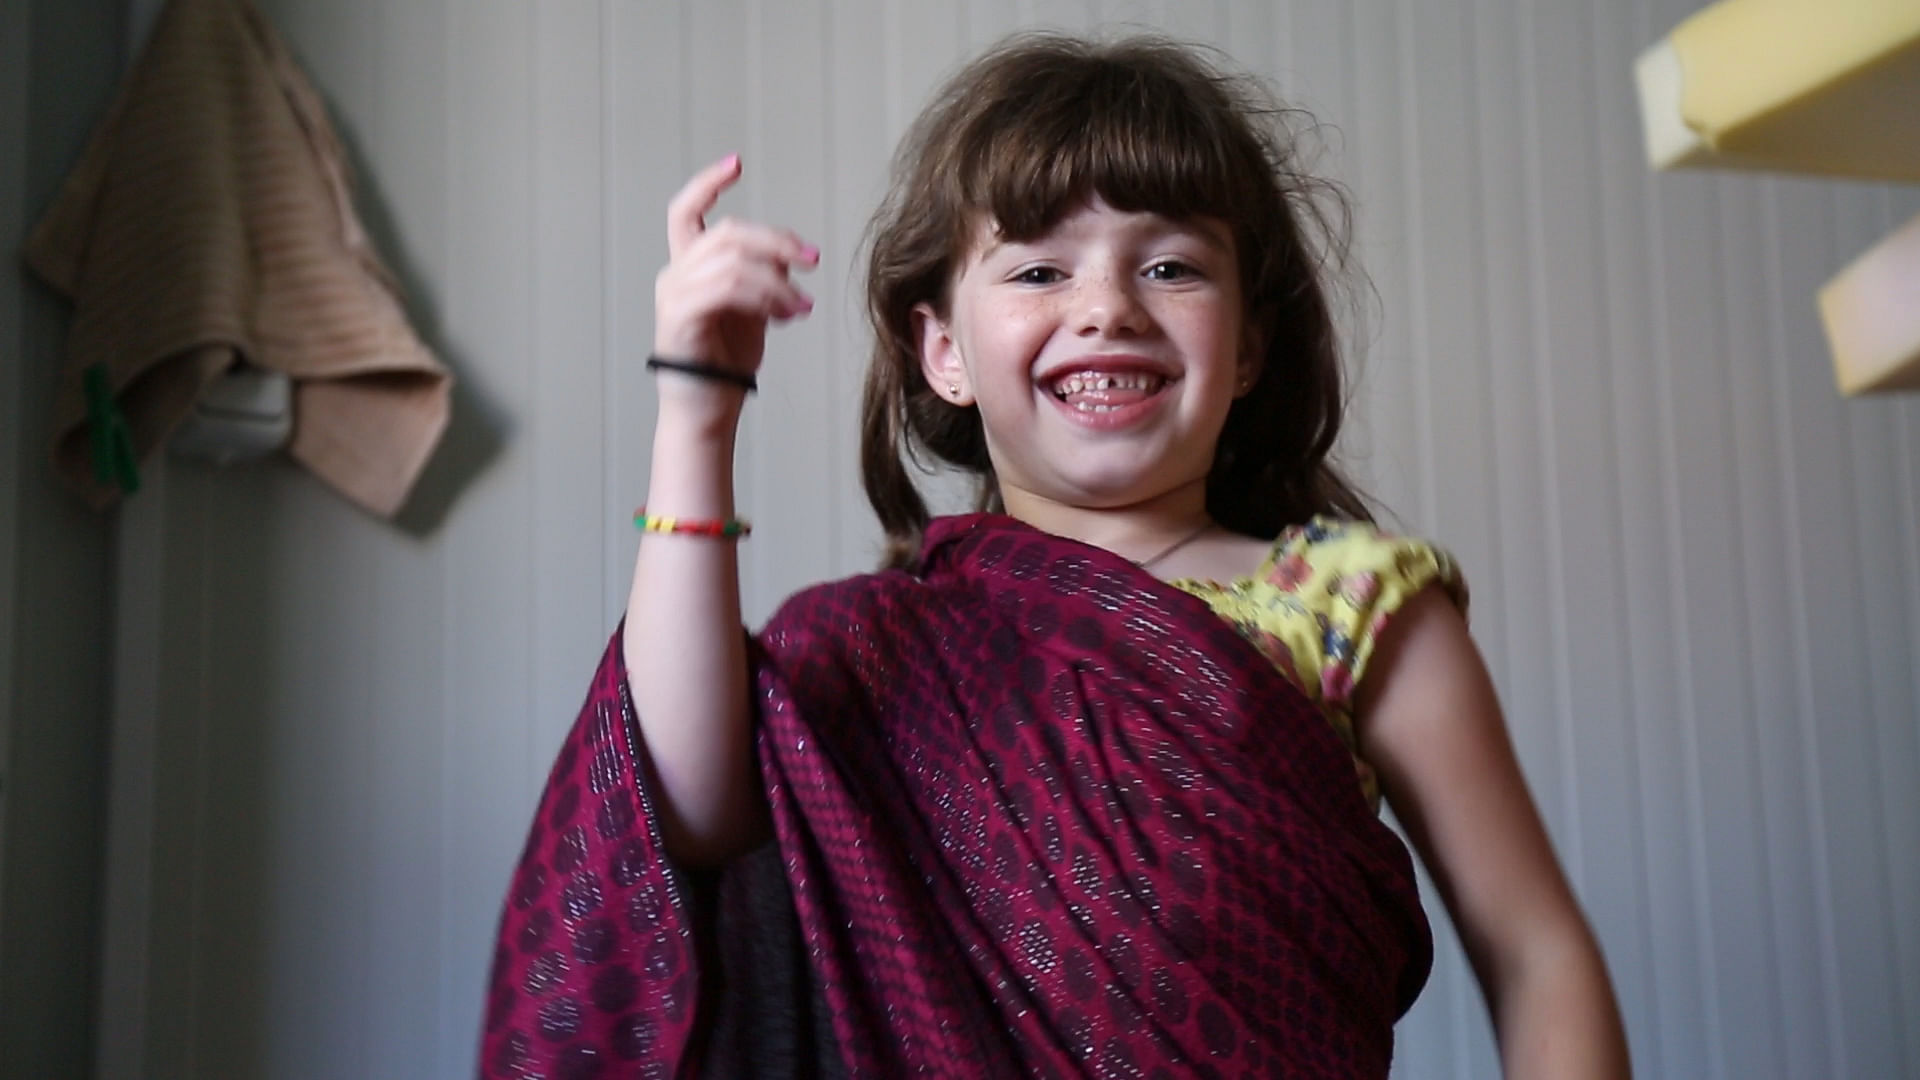 A Syrian girl from a refugee camp in Greece dances to Bollywood numbers (Photo: The Quint)